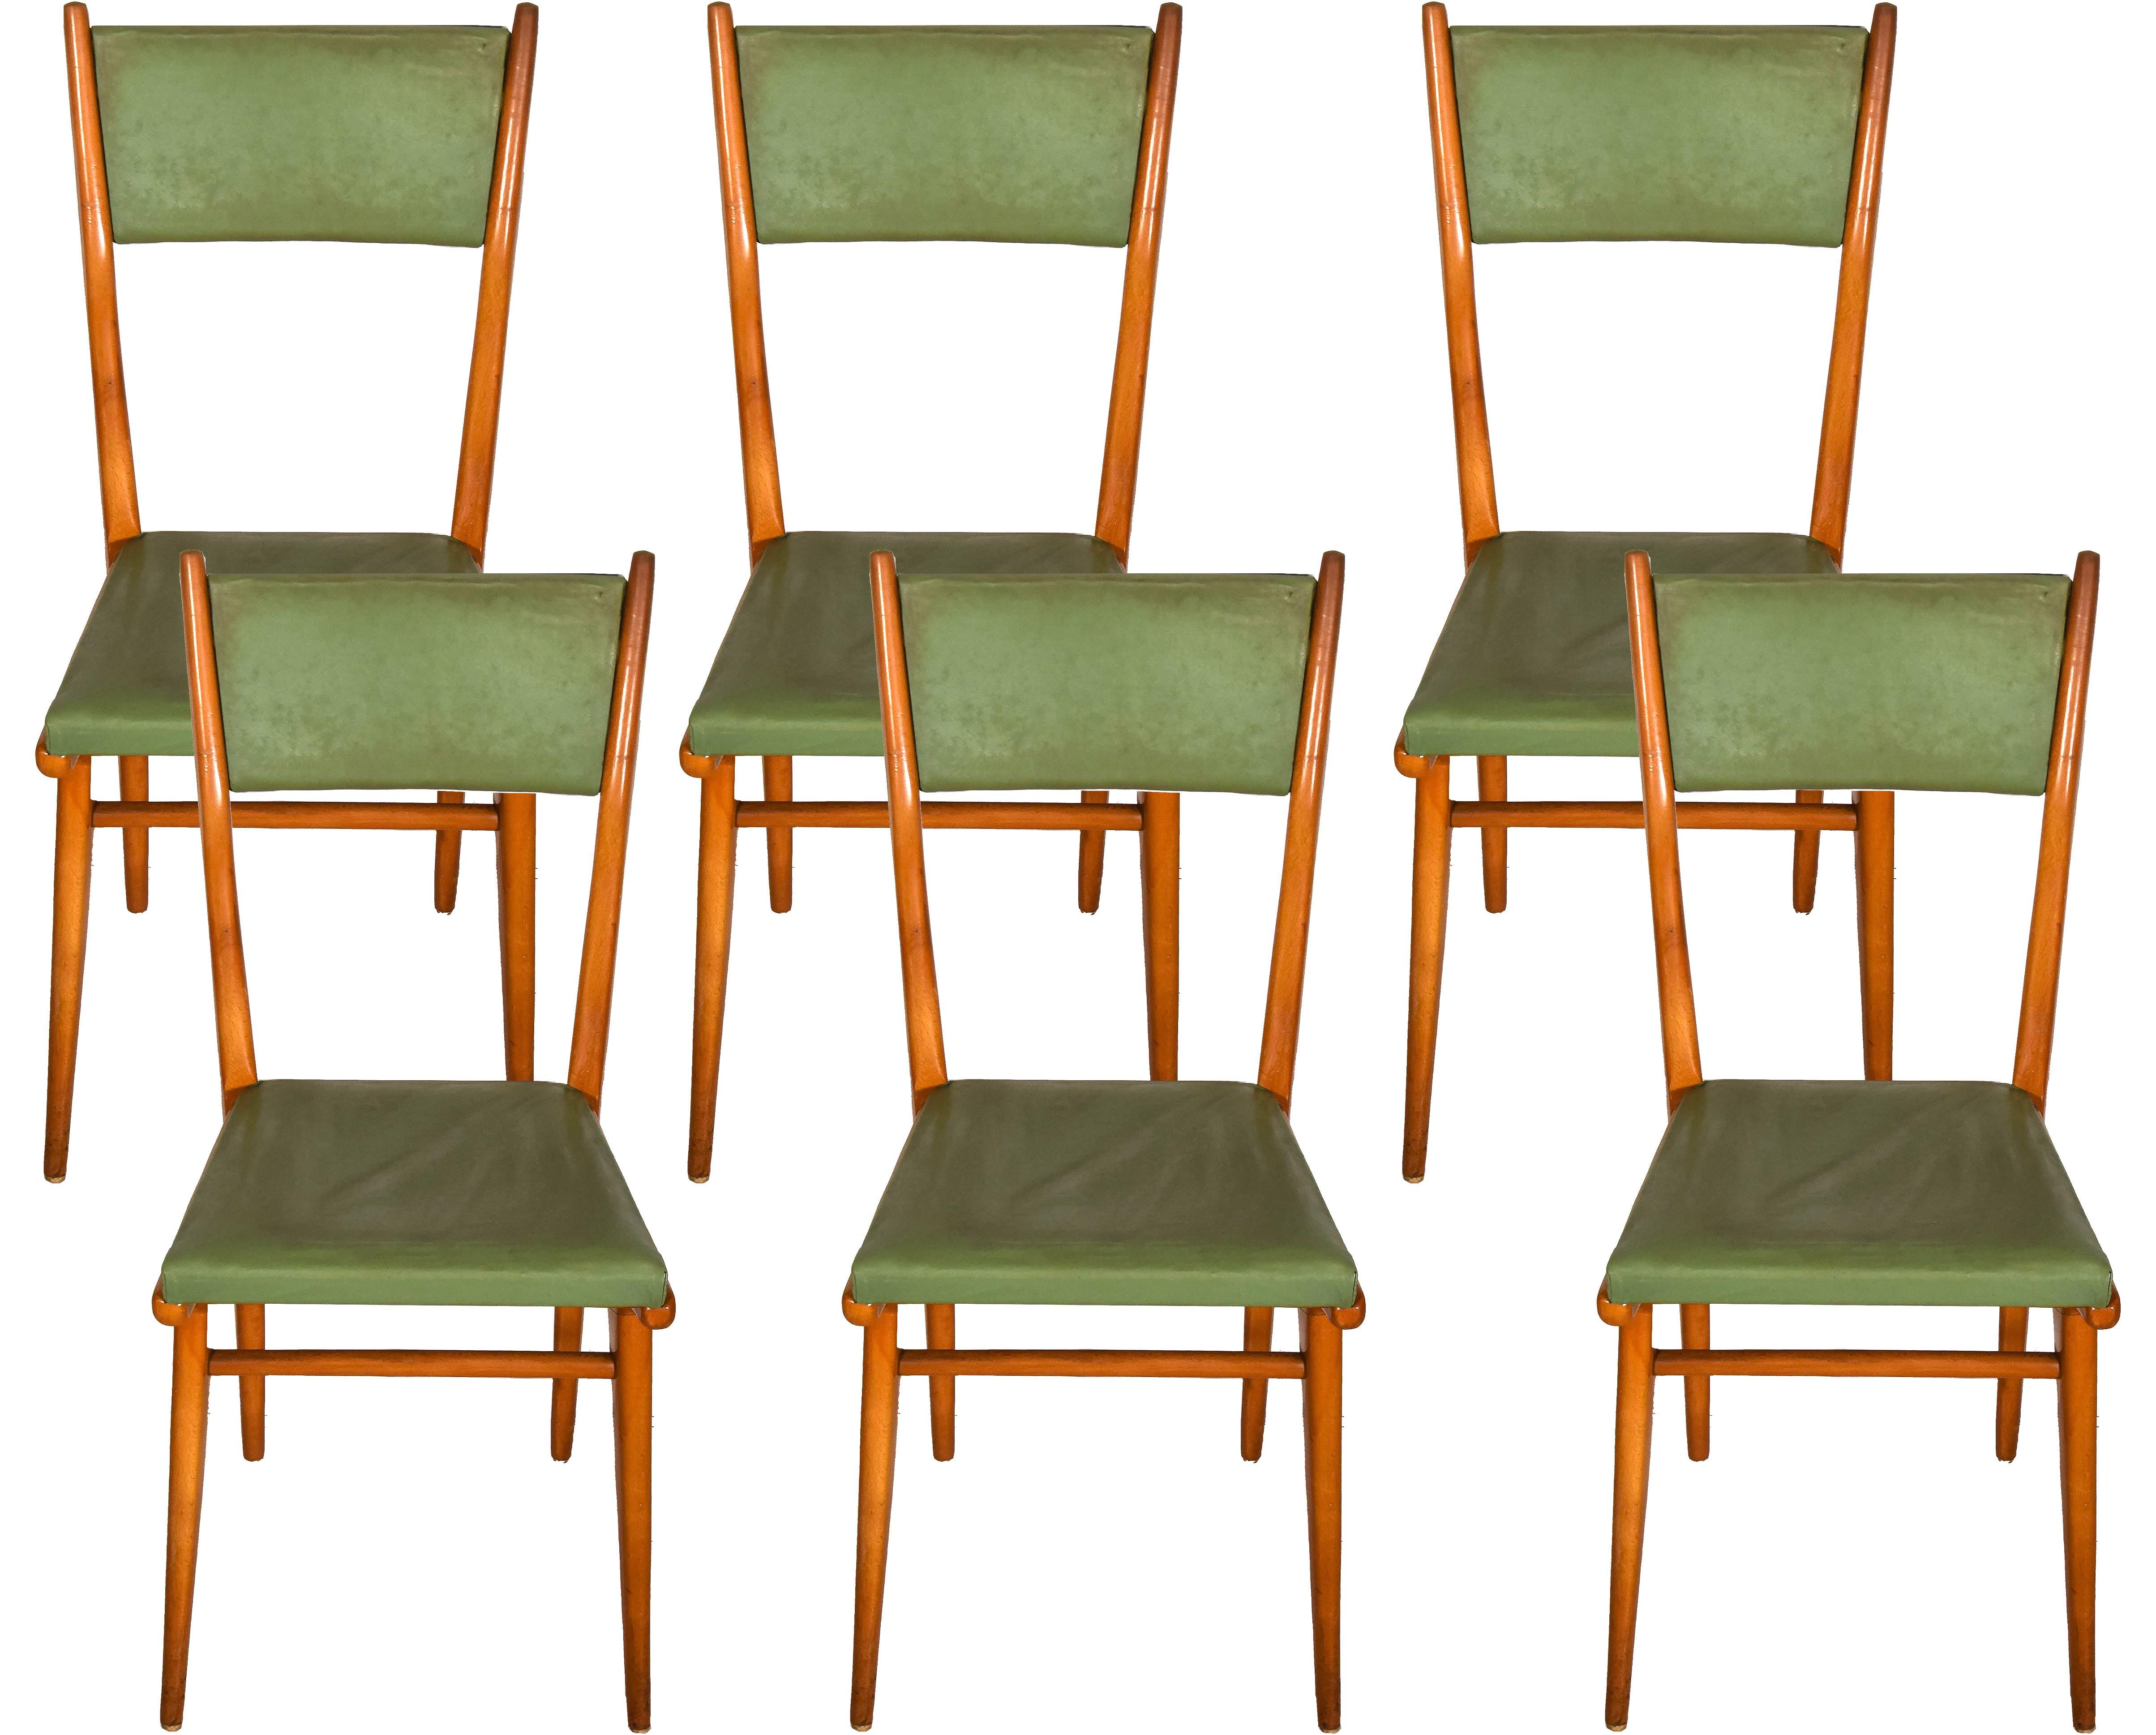 This set of six green chairs is a midcentury design furniture manufactured in Italy in the 1950s.

Beautiful vintage set including six green upholstered chairs.

Every piece is in good conditions except for some minor holes.

Dimensions: cm 44 x 95